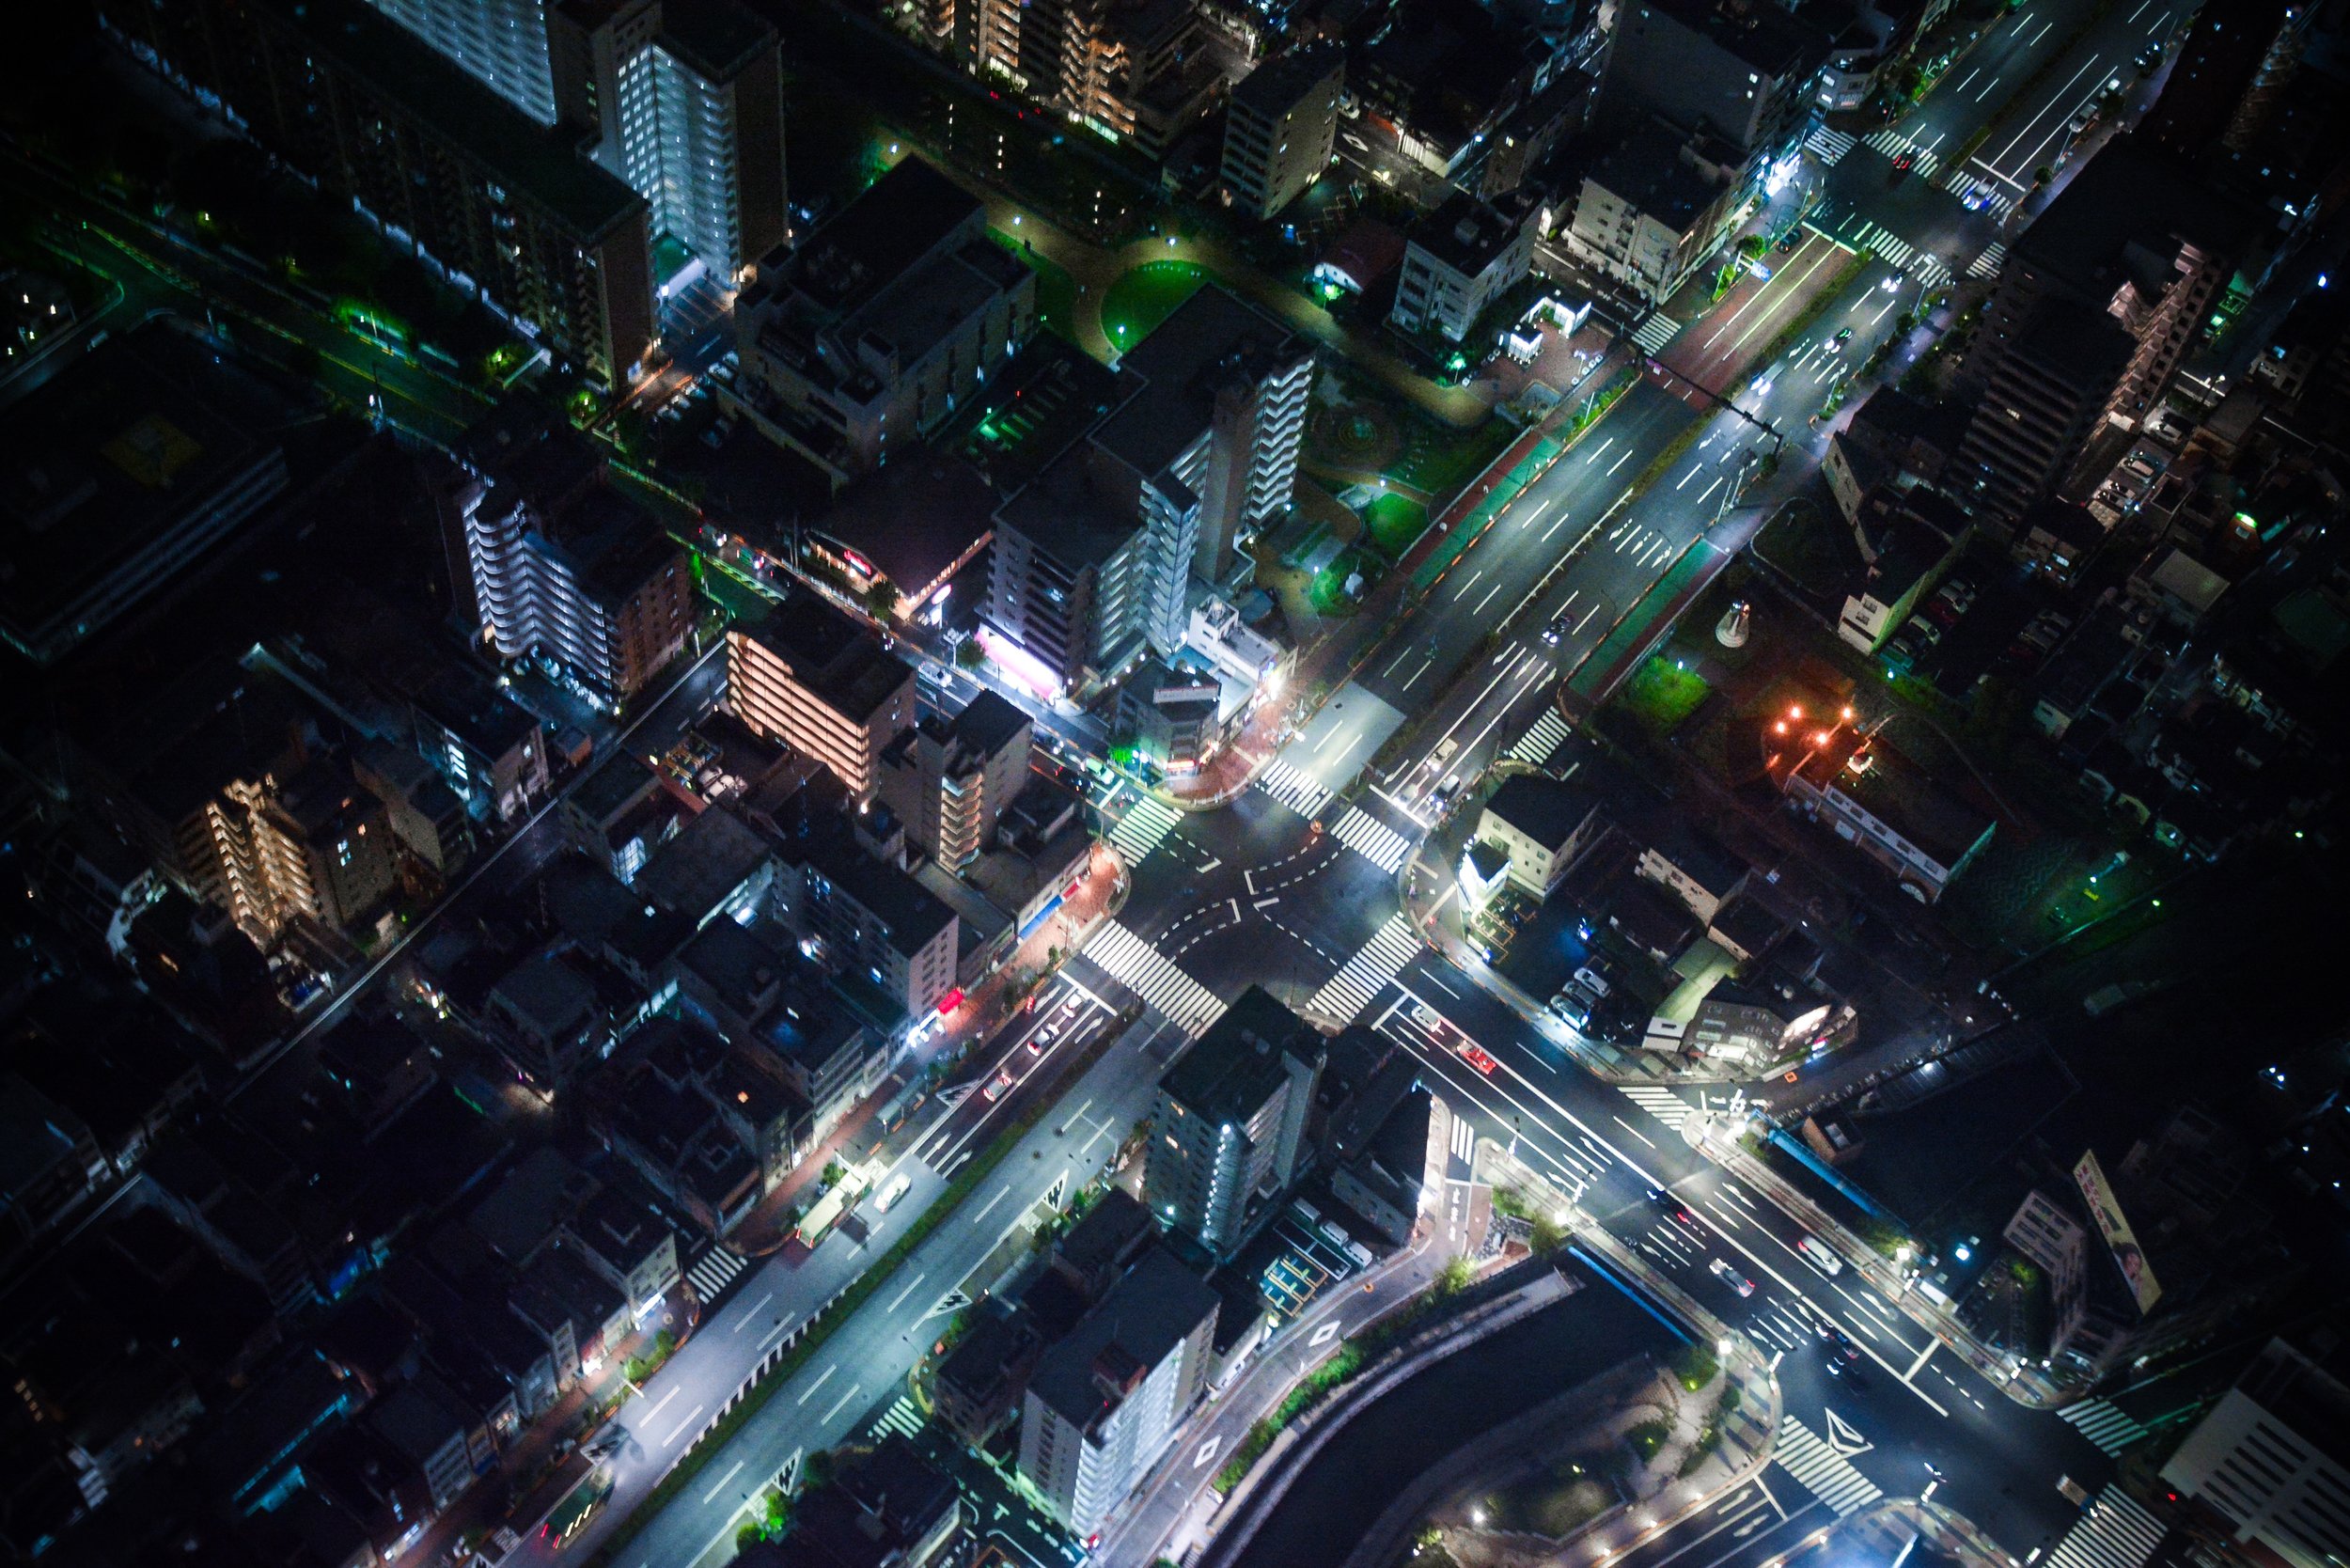 Buildings, streetlights, cars, phones, and keychain bobbles—practically all the things in this image—can now be connected to the Internet.&nbsp;